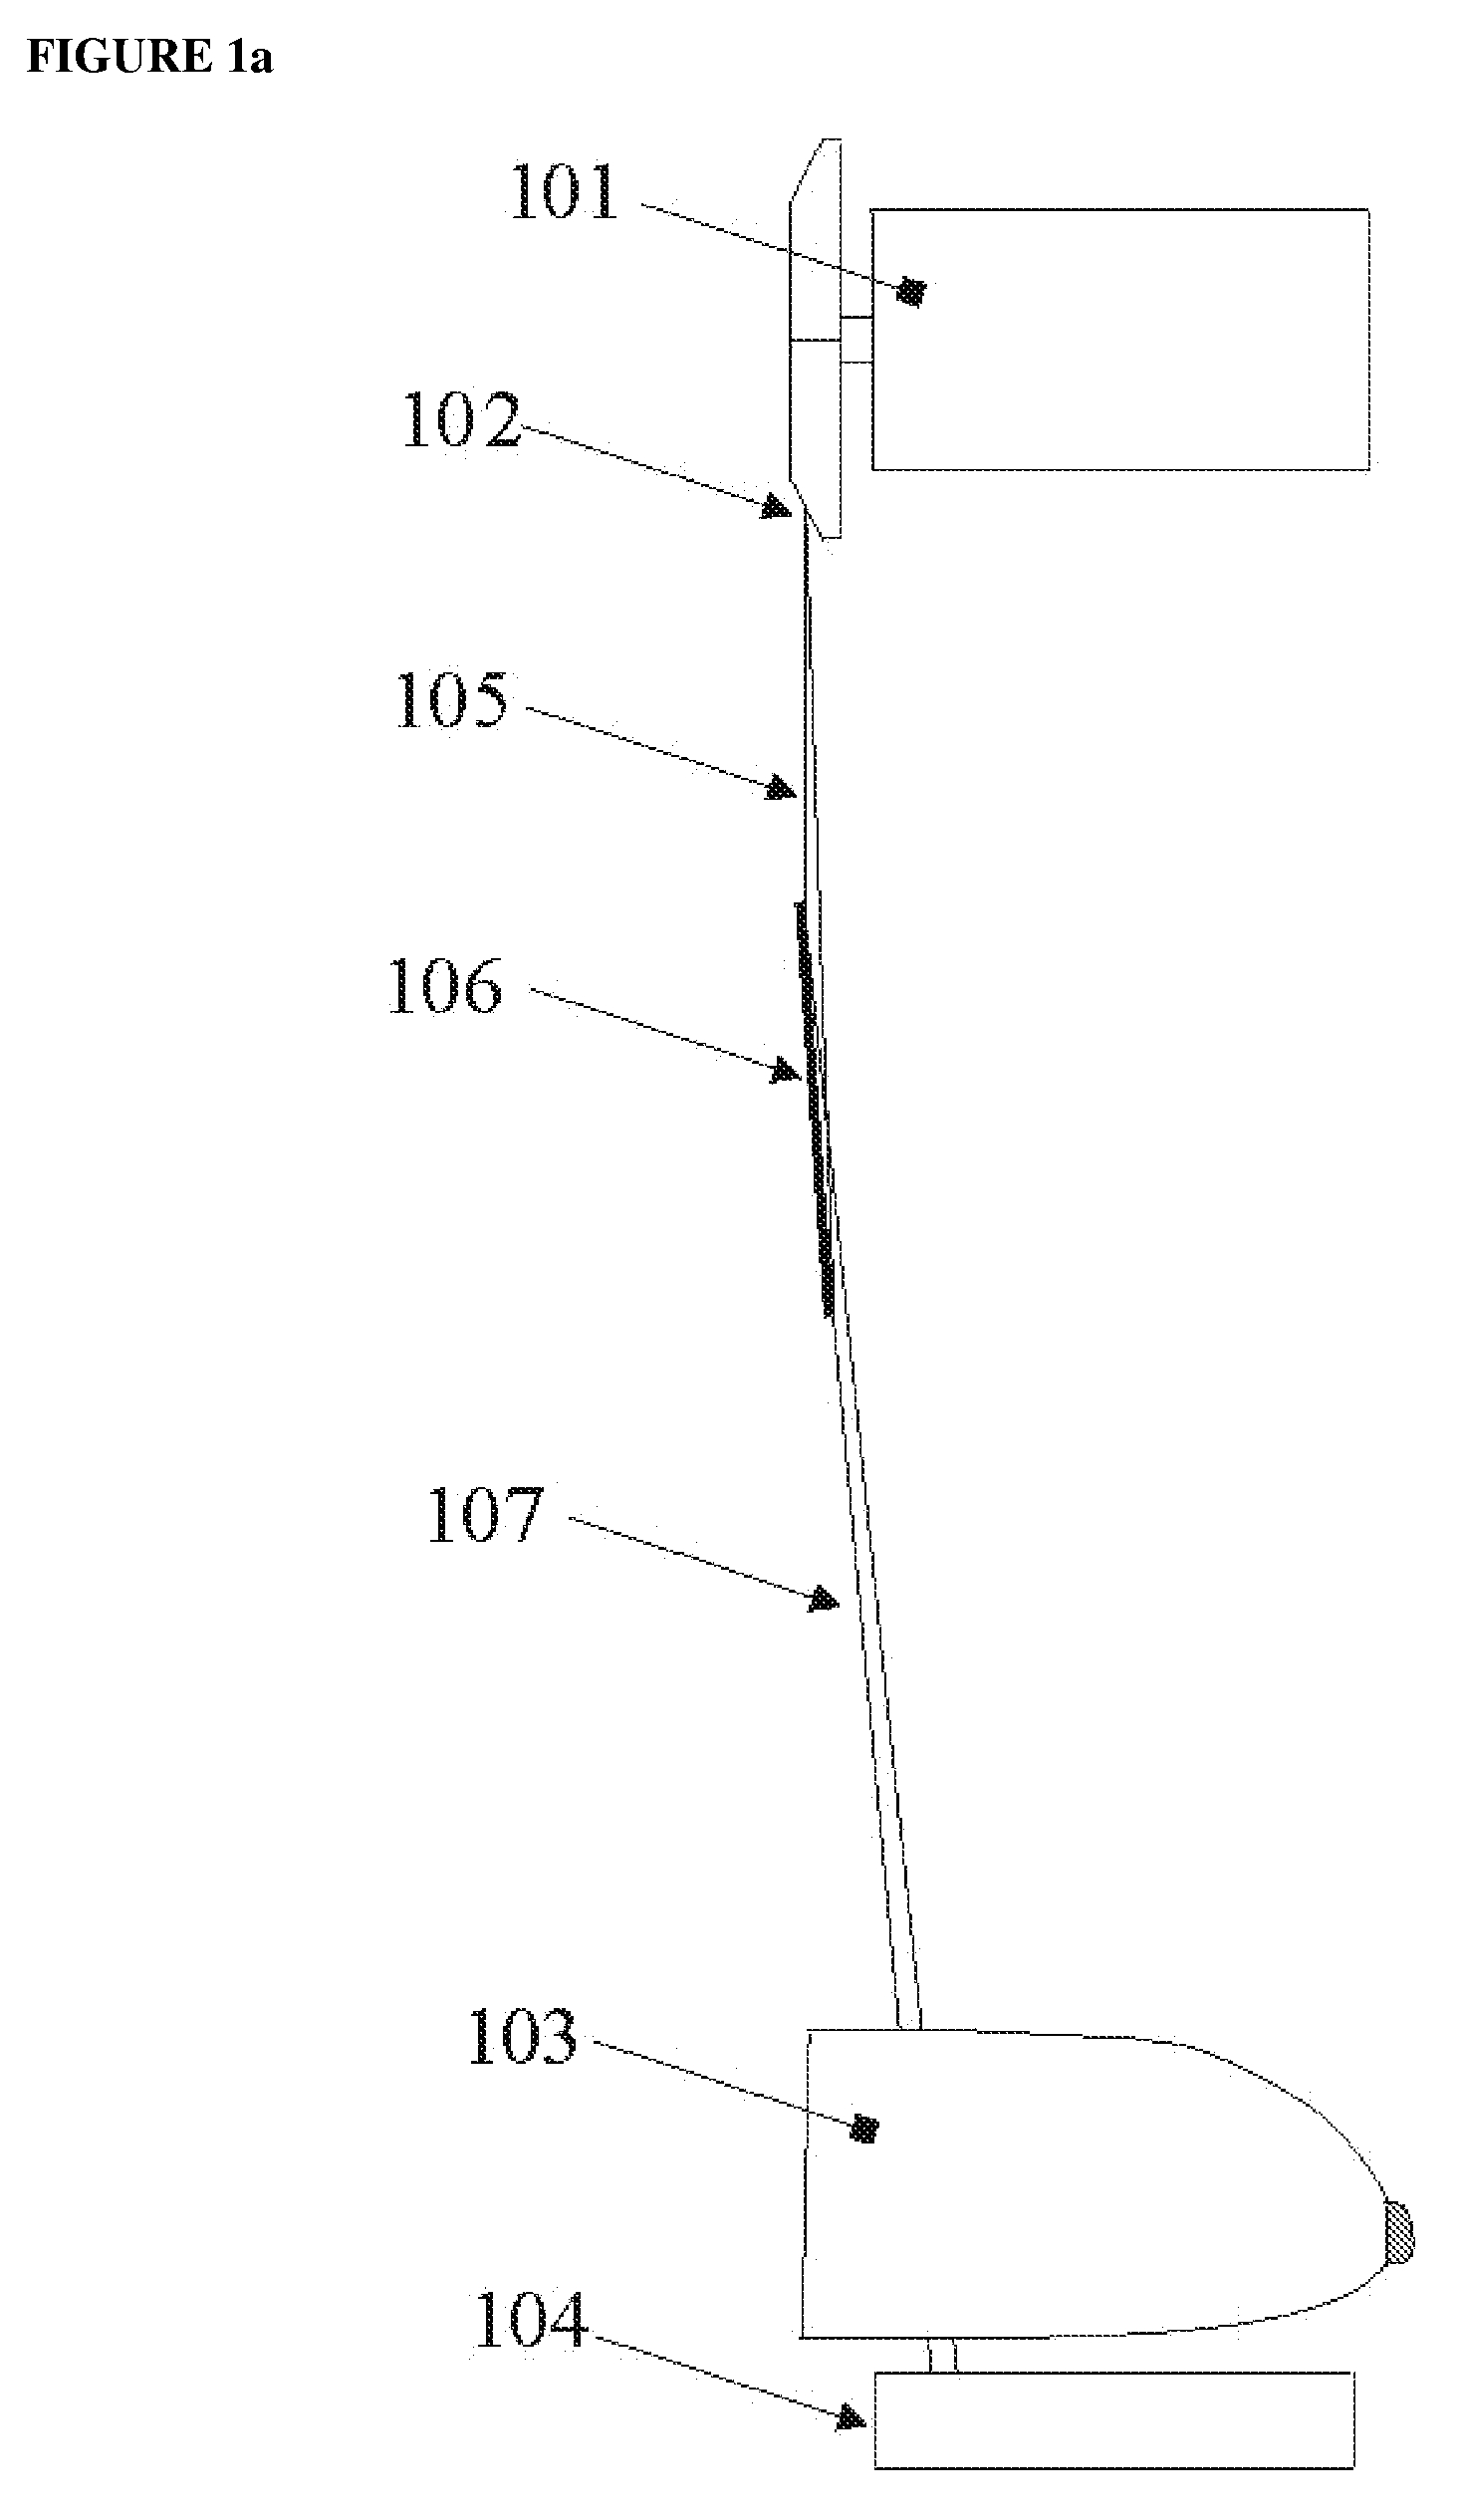 Mirror mounting, alignment, and scanning mechanism and scanning method for radiographic x-ray imaging, and x-ray imaging device having same